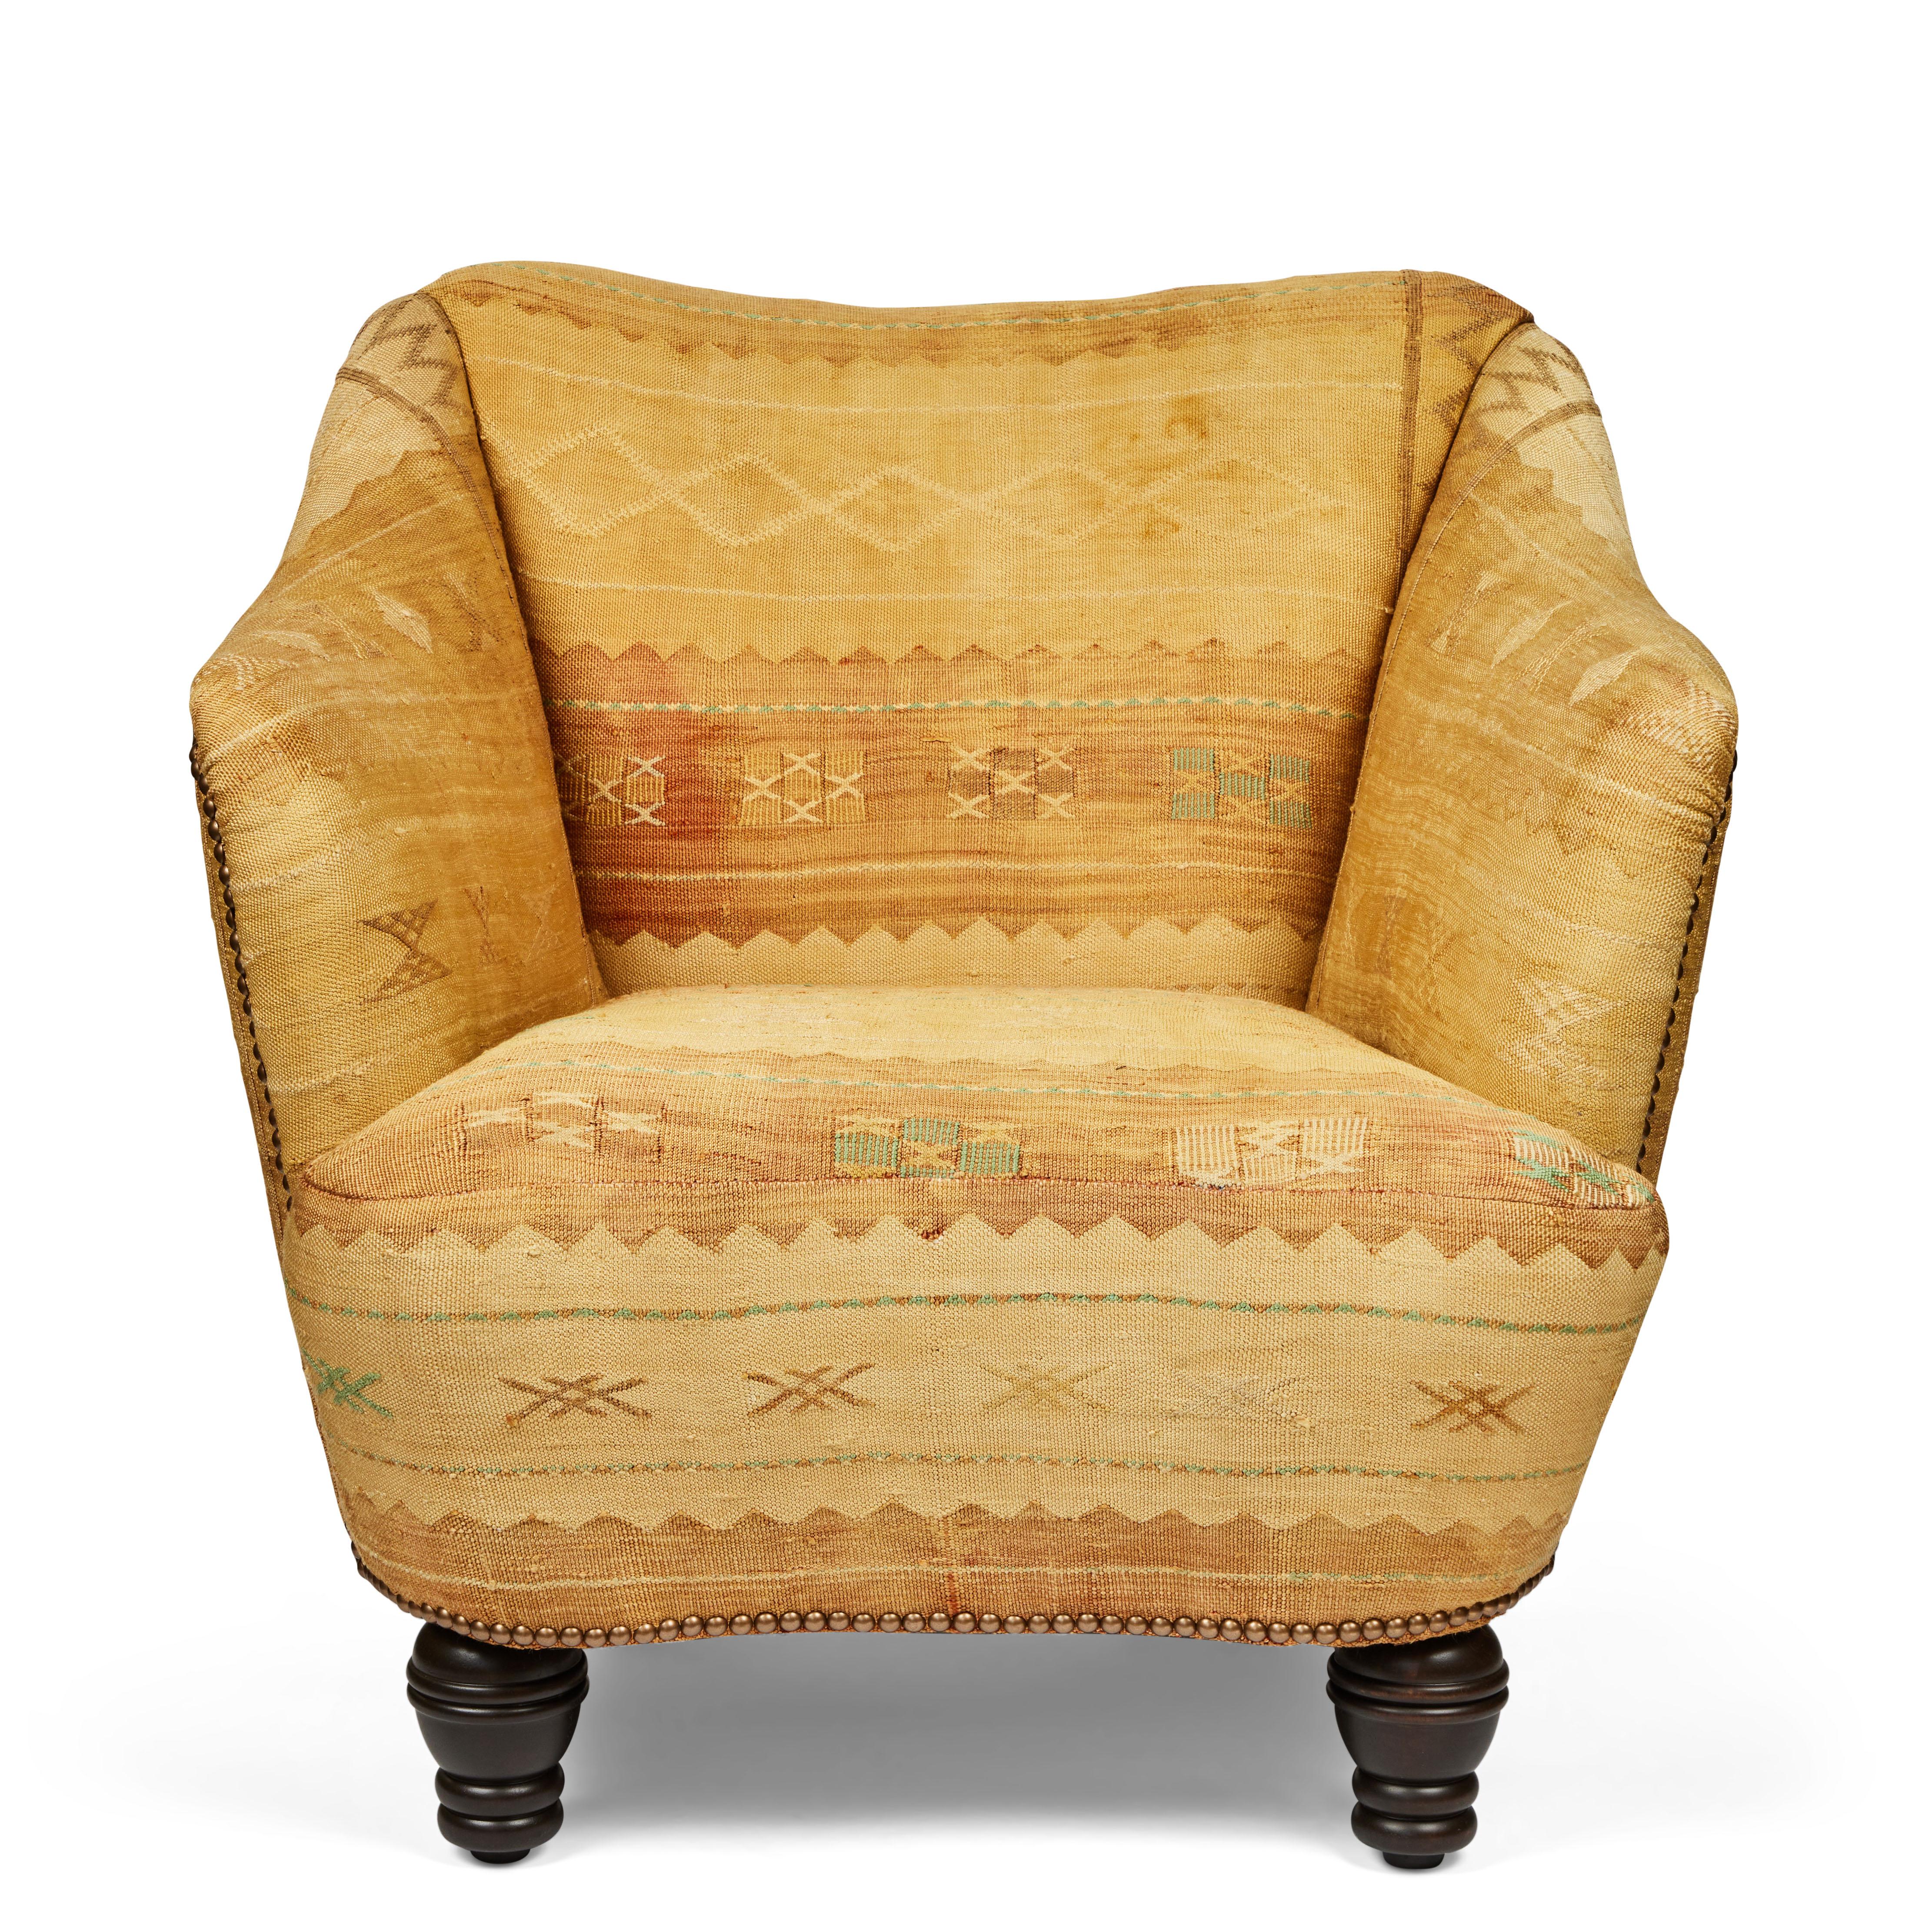 This sculptural winged chair is upholstered in a vintage serene color combination cactus cloth tapestry from Morocco which is so inviting. It has been outfitted with new turned chubby wood legs and accented with decorative brass nailhead detailing.